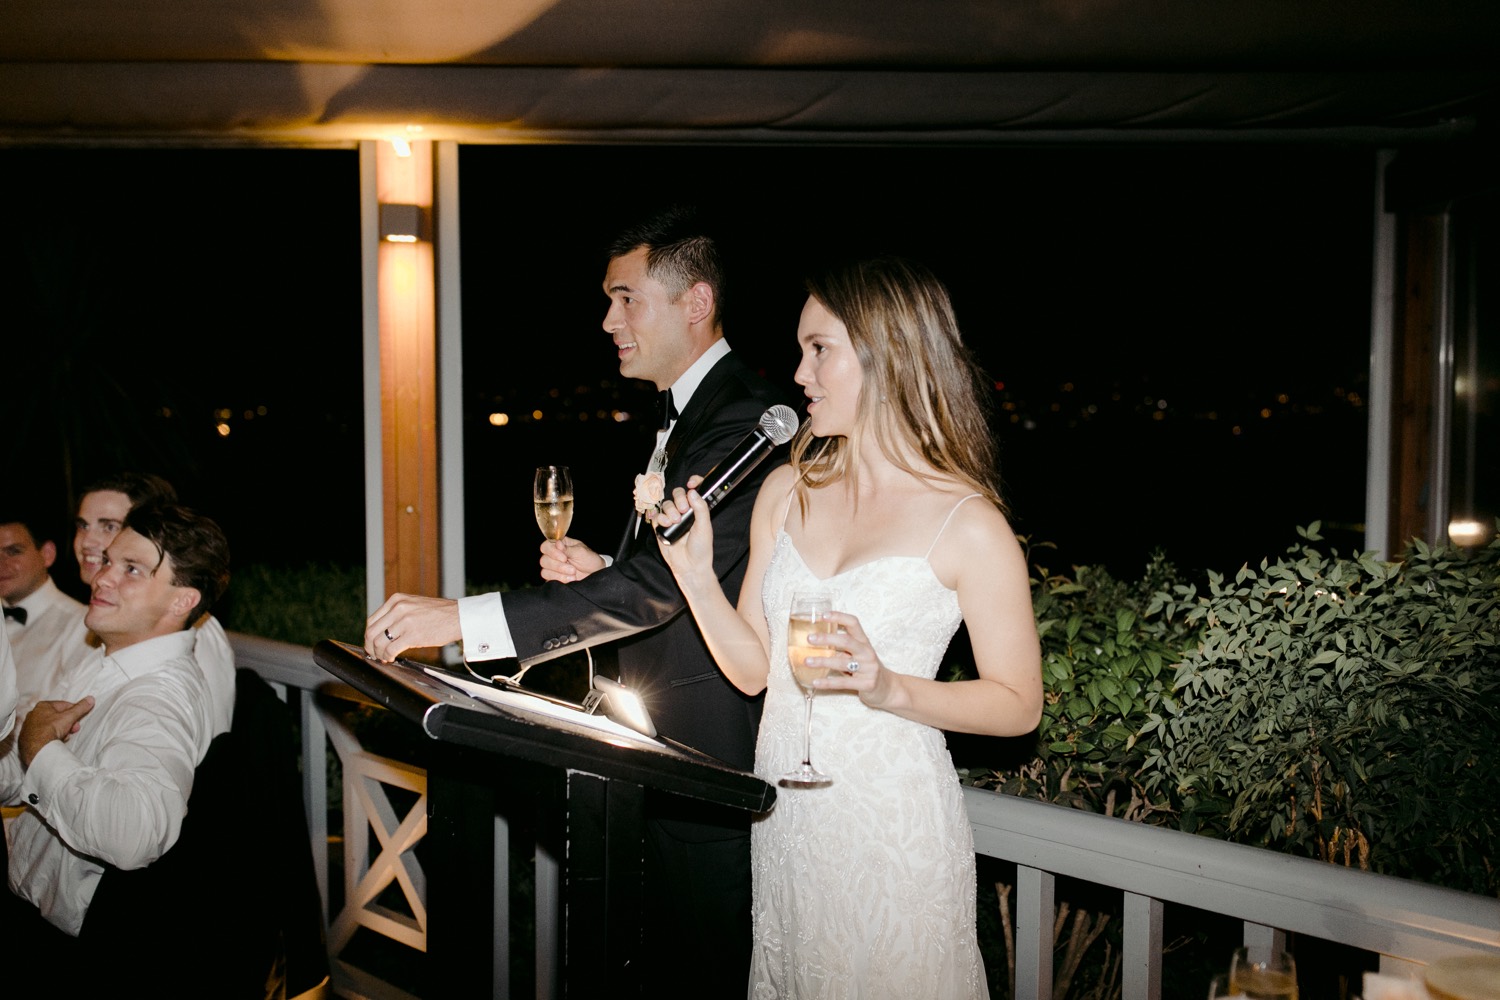 night time speeches at weddings